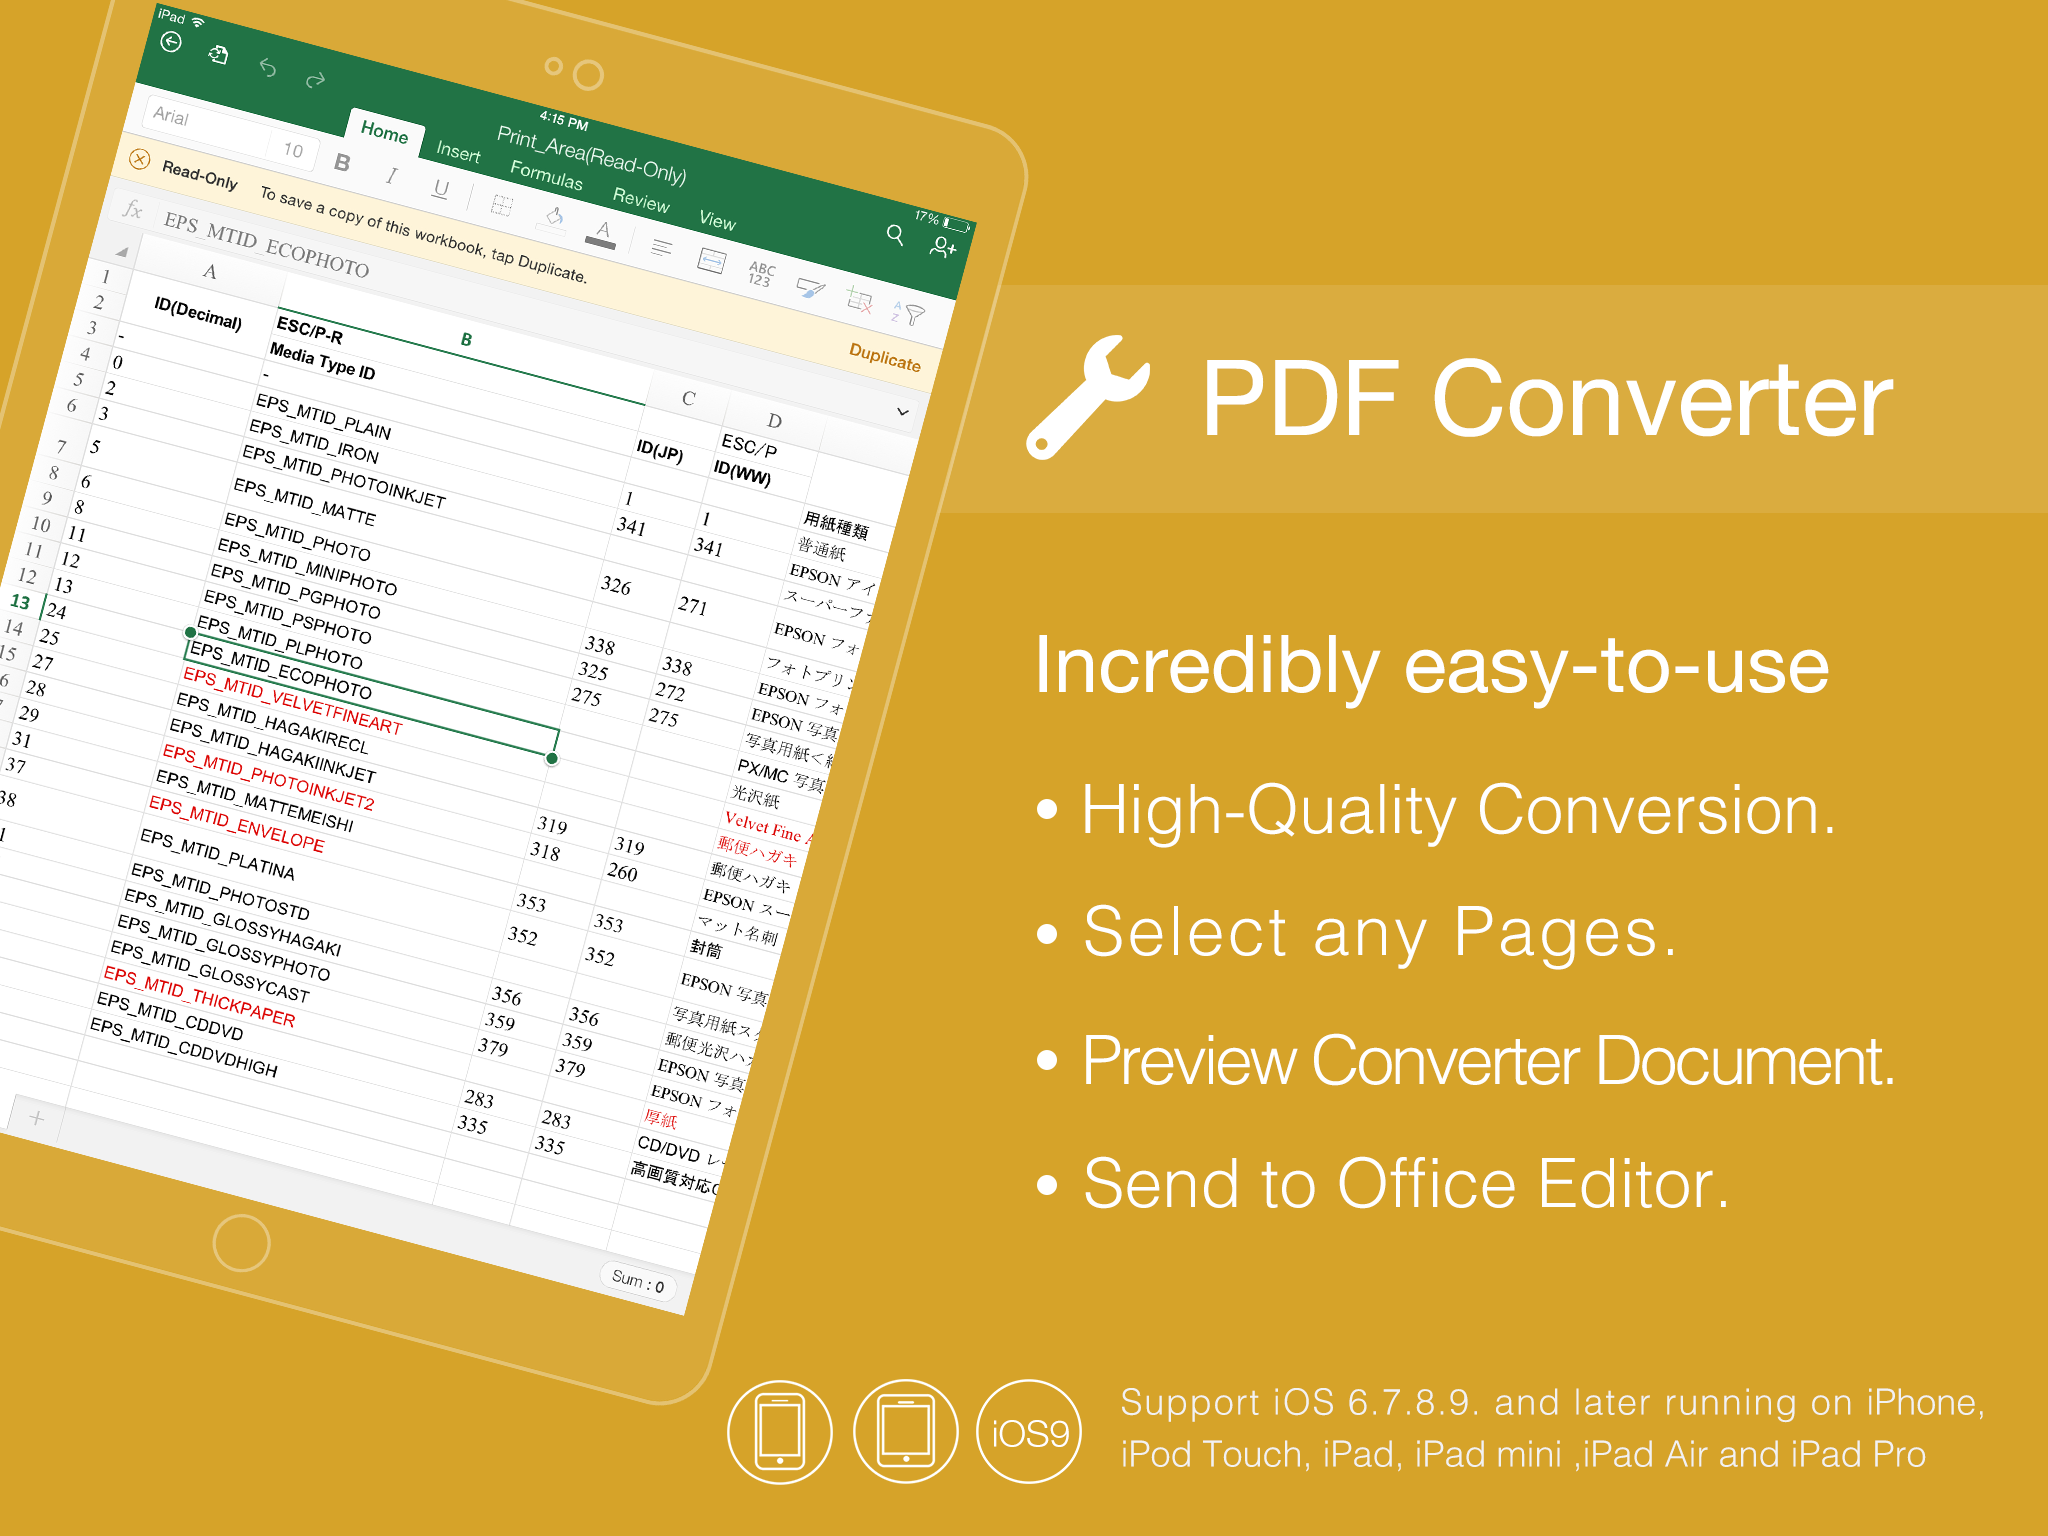 PDF to Converter for iPhone, iPad and other iOS devices - Convert PDF